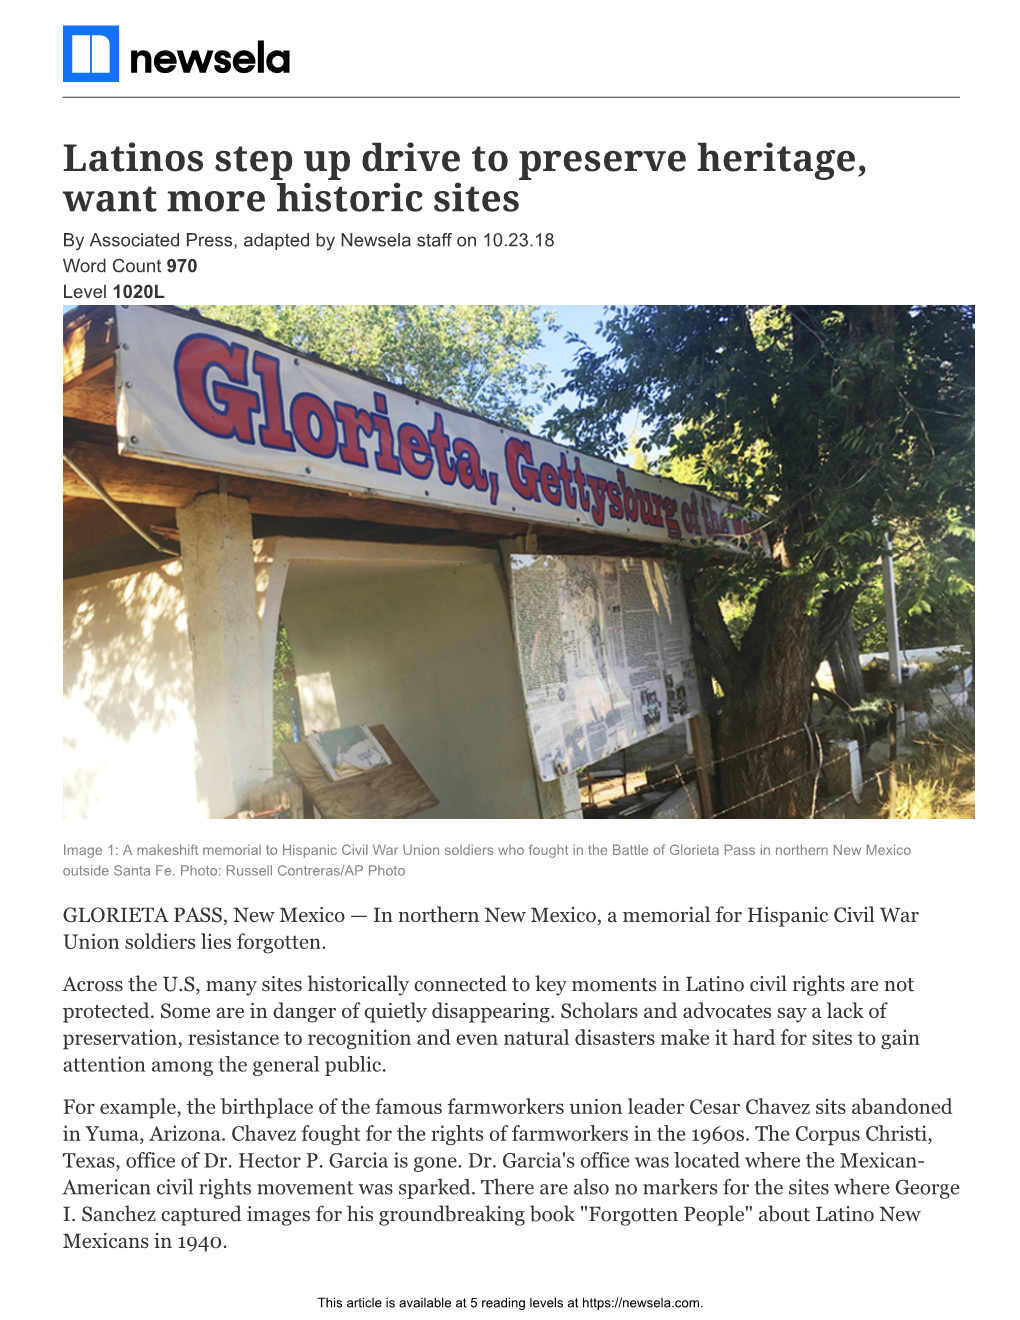 Latinos Step up Drive to Preserve Heritage, Want More Historic Sites by Associated Press, Adapted by Newsela Staff on 10.23.18 Word Count 970 Level 1020L